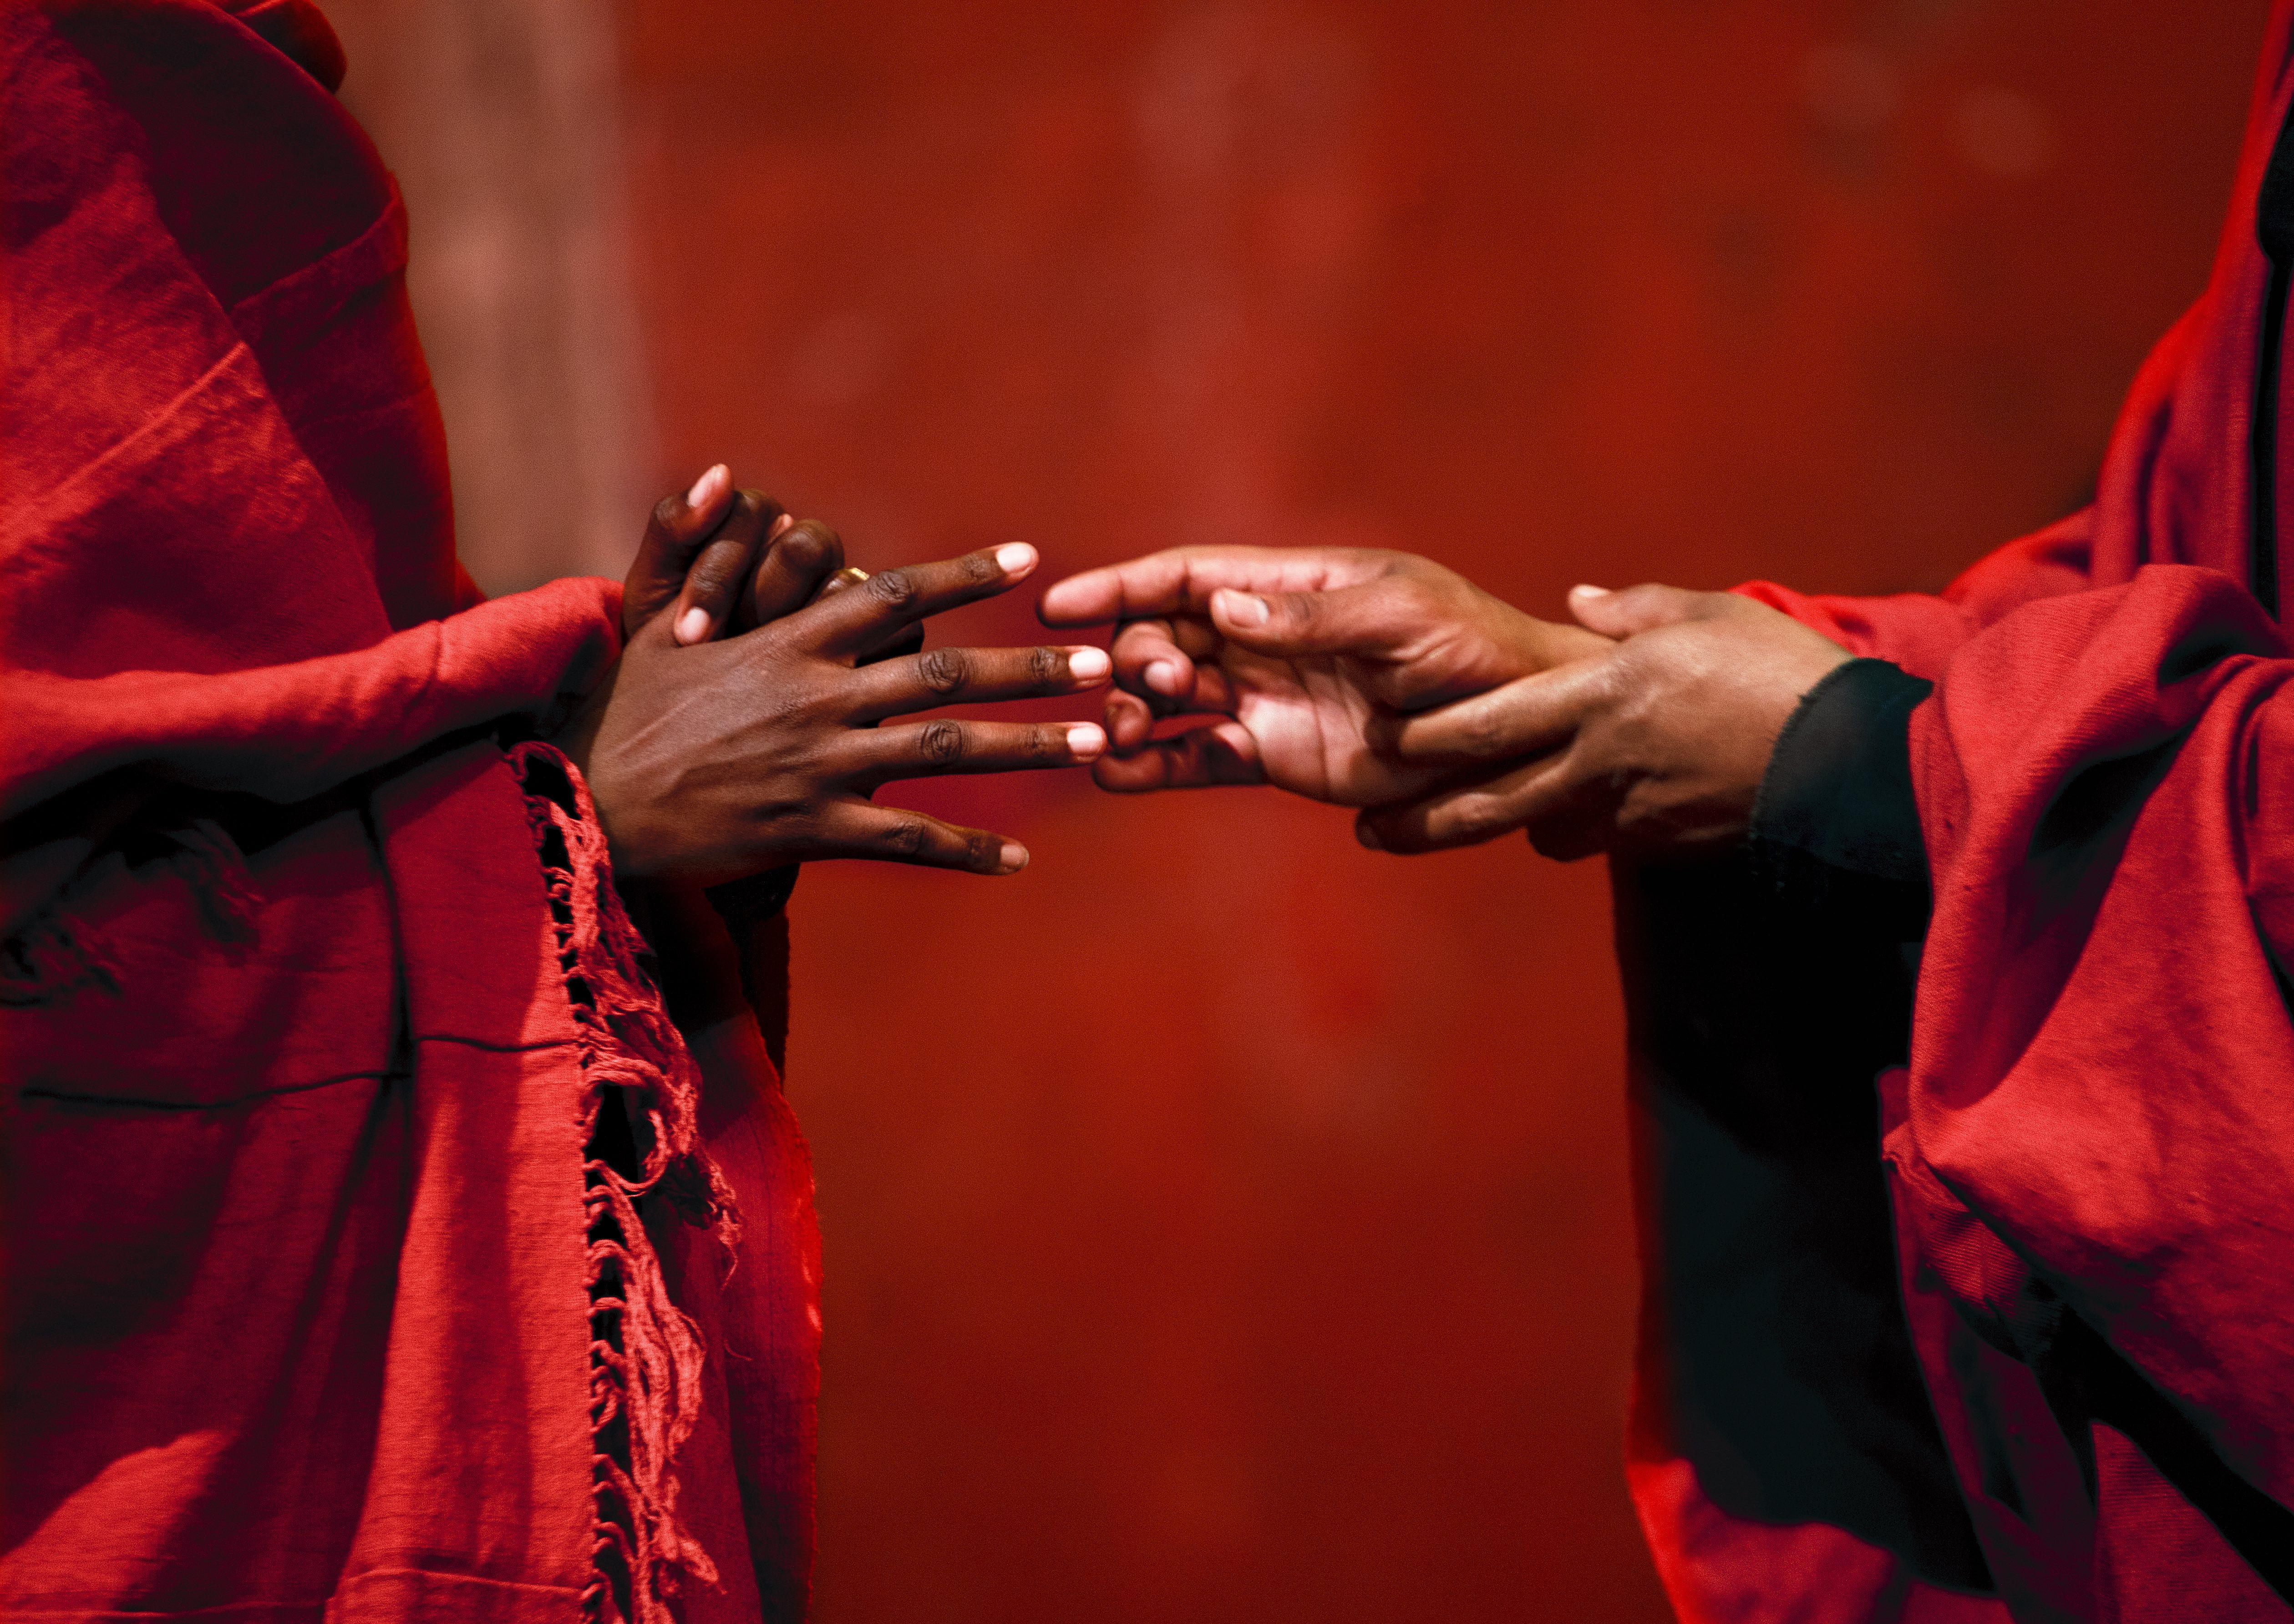 Two pairs of hands, almost but not quite touching, take on conflicting gestures: one hand reaches toward the other, the second hand holds the first hand back. Both people are wrapped in red draped garments, but only their hands are visible.